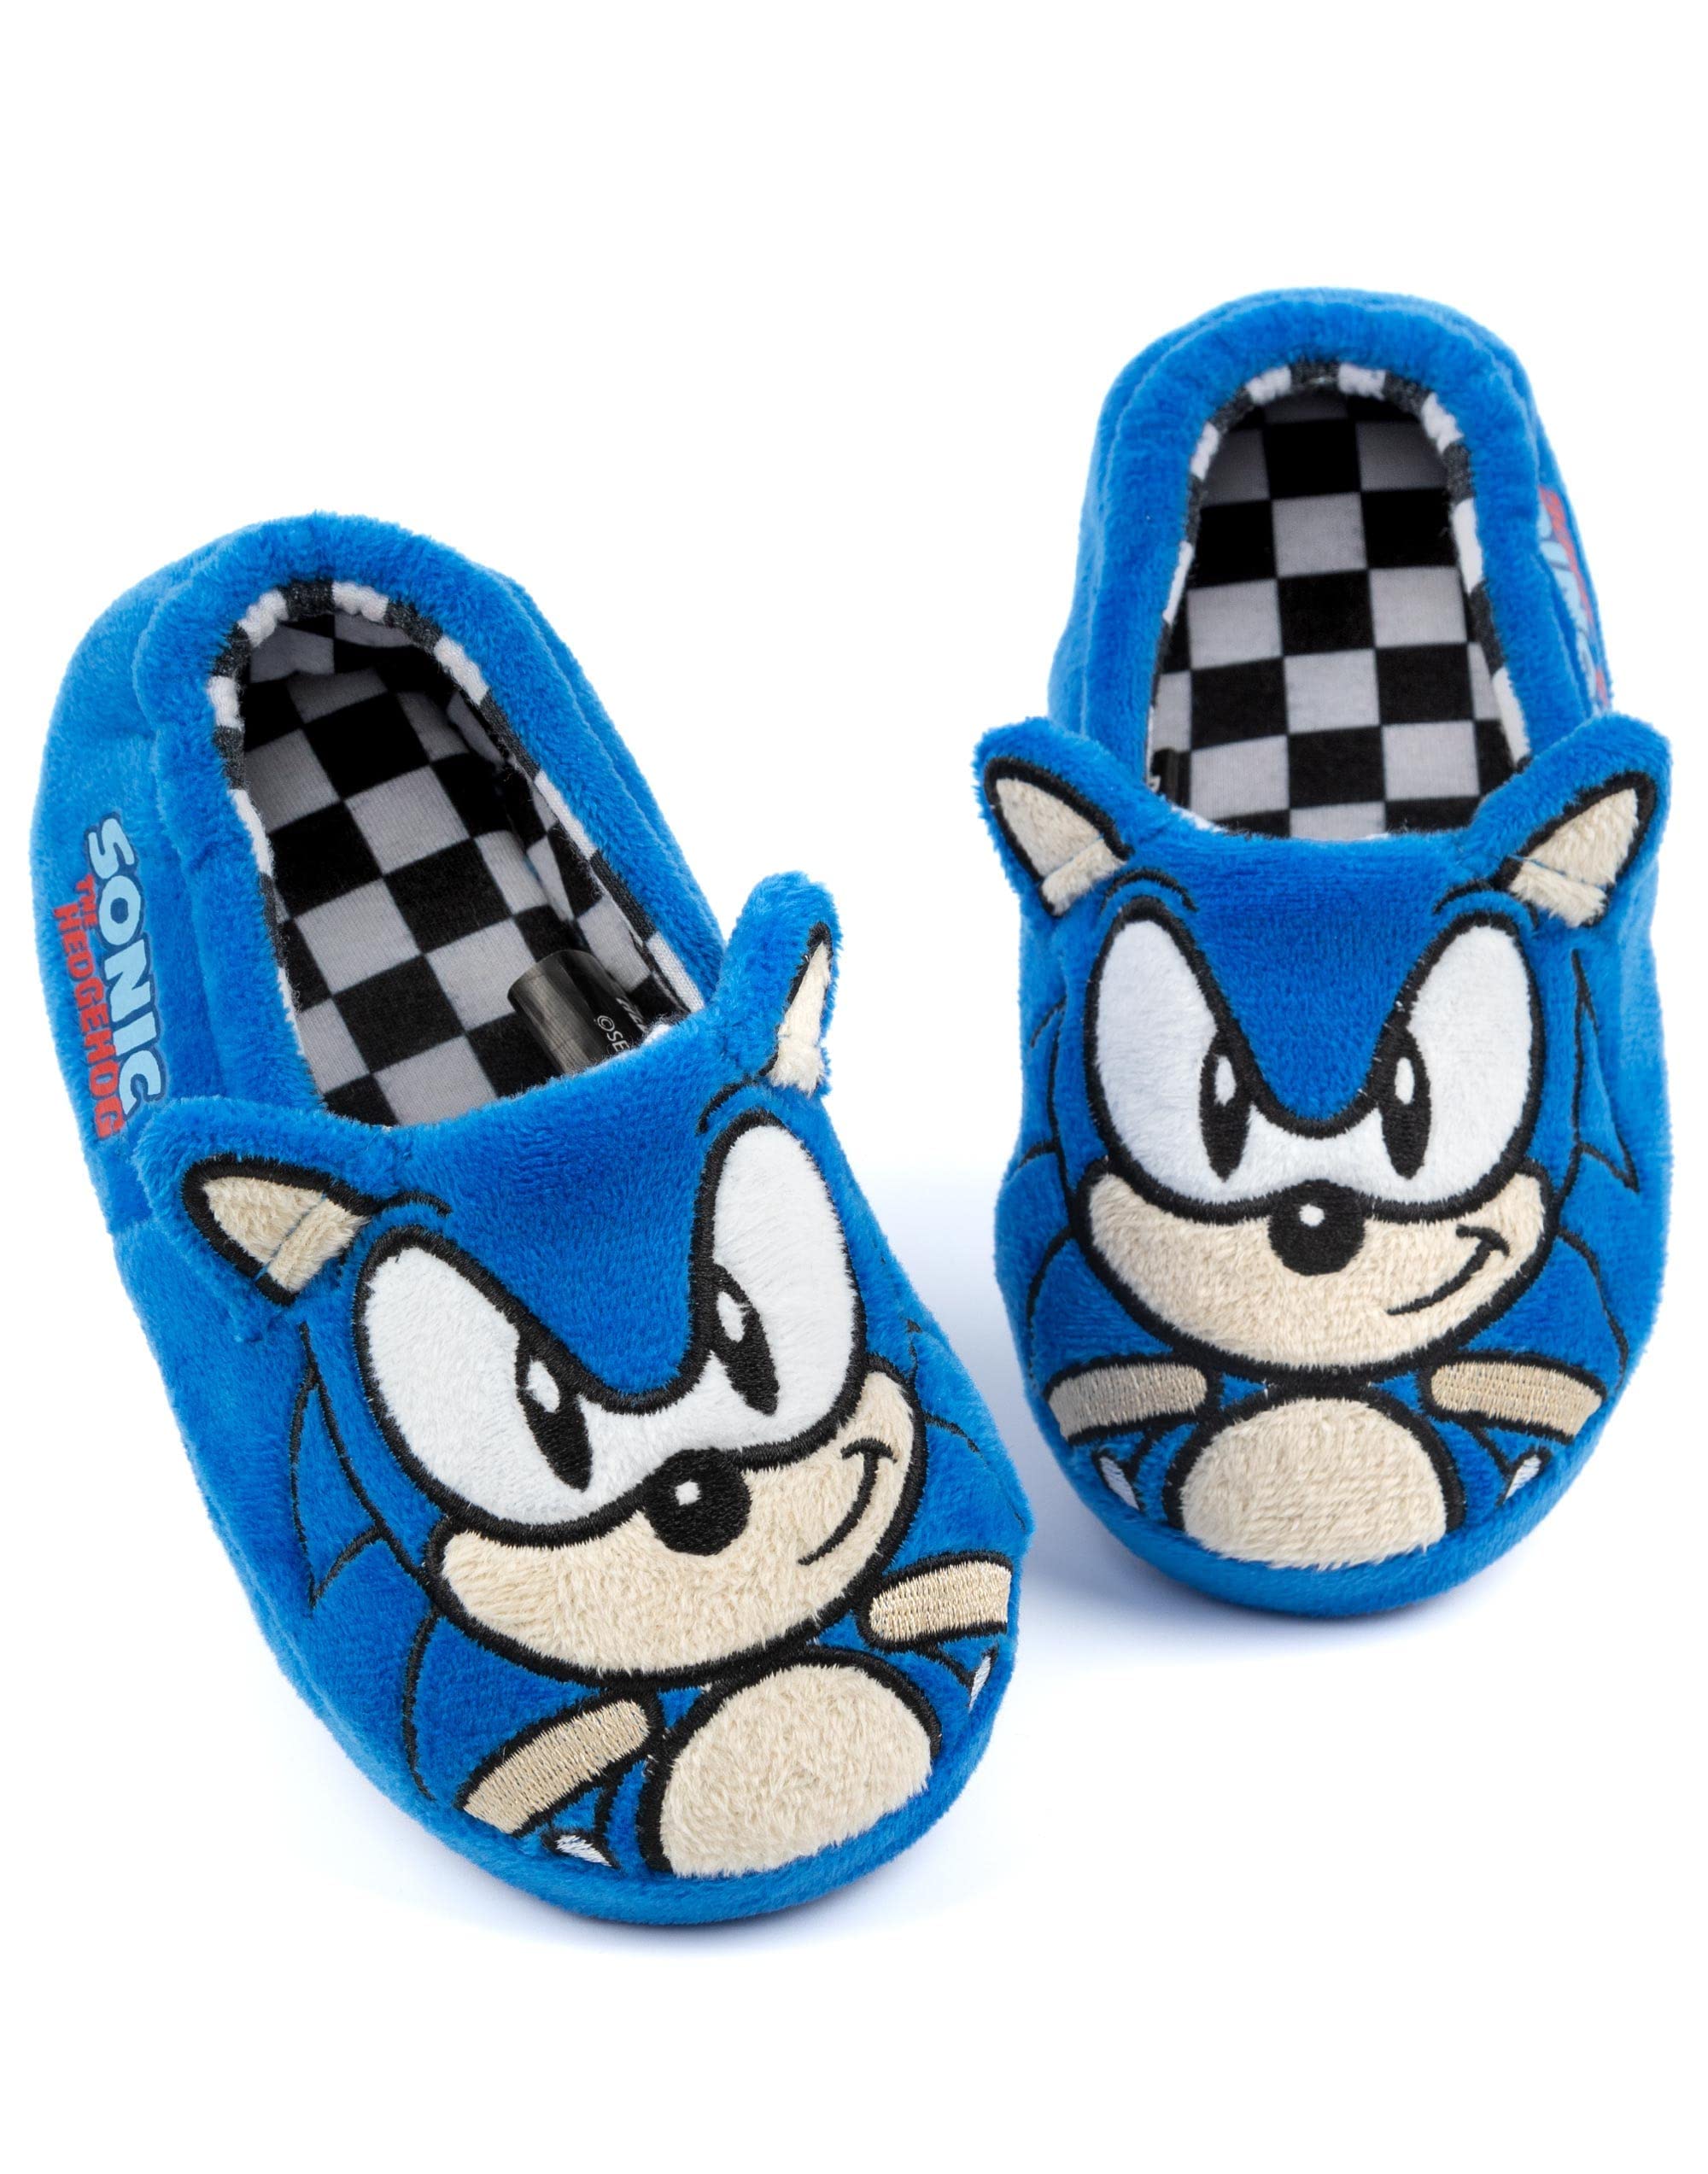 Sonic the Hedgehog Slippers Kids Plush Embroidered Face 3D Character Shoes